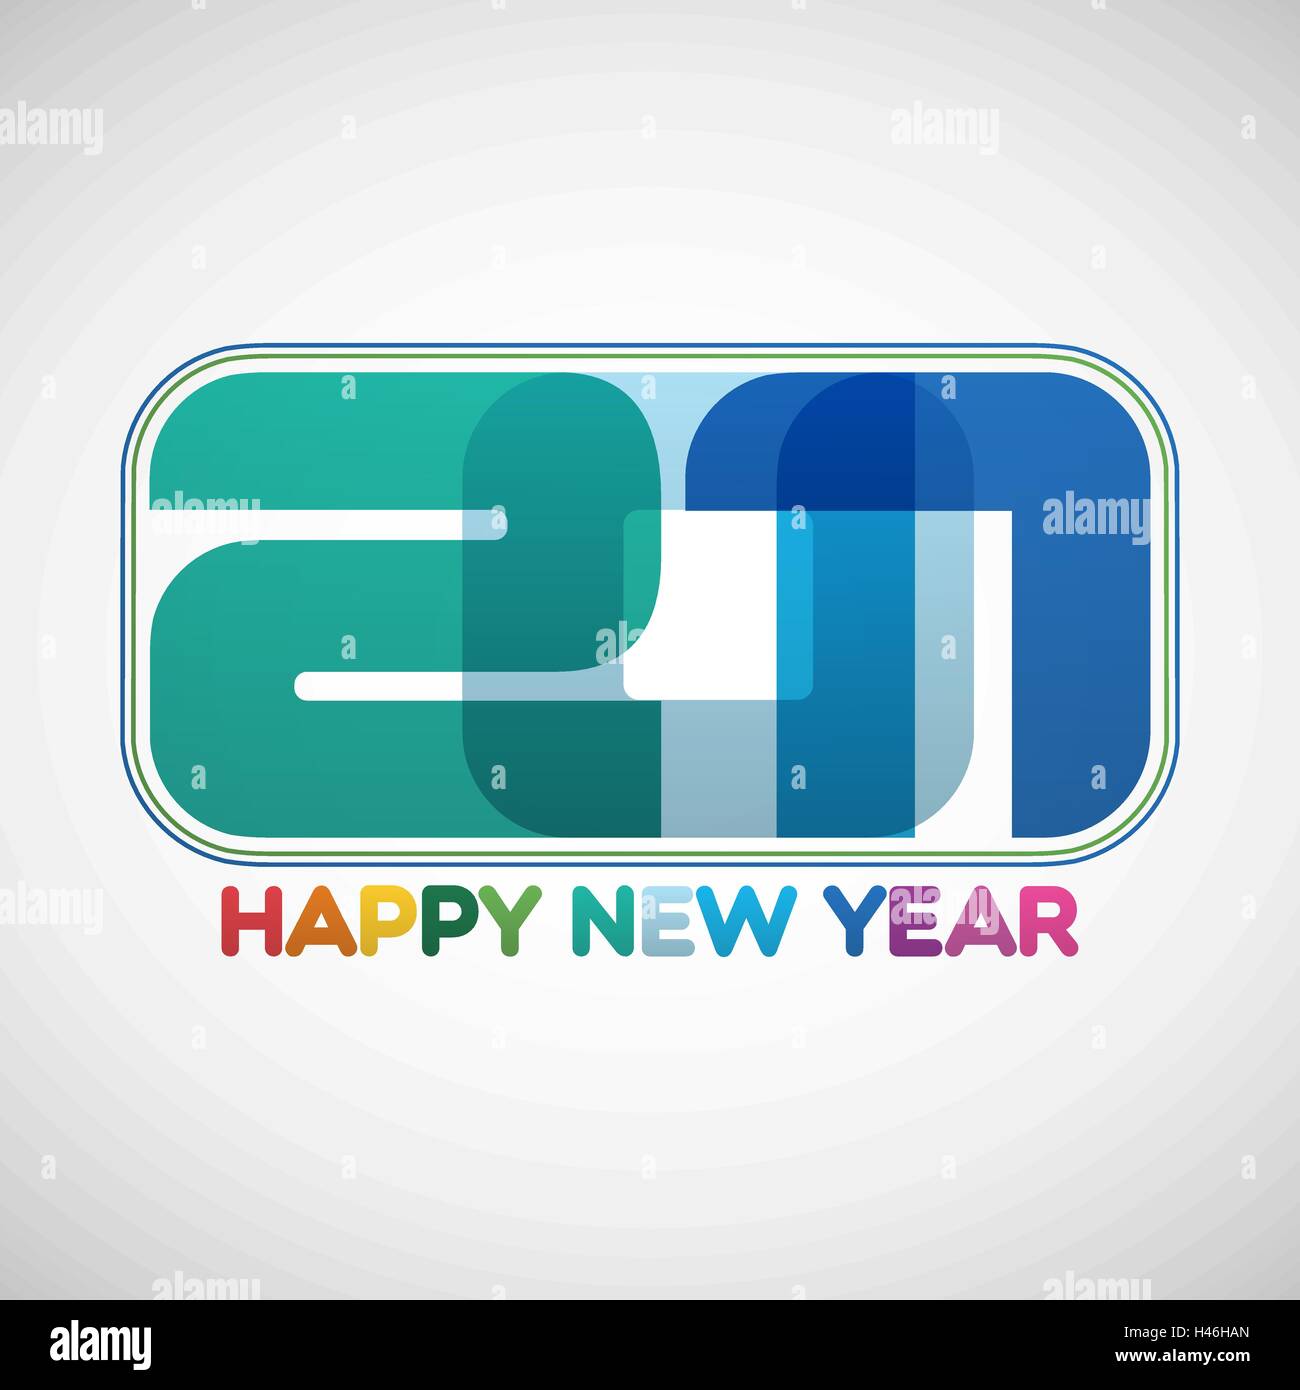 Happy New Year 2017 creative multicolored text design for your calendar templates or greeting cards Stock Vector